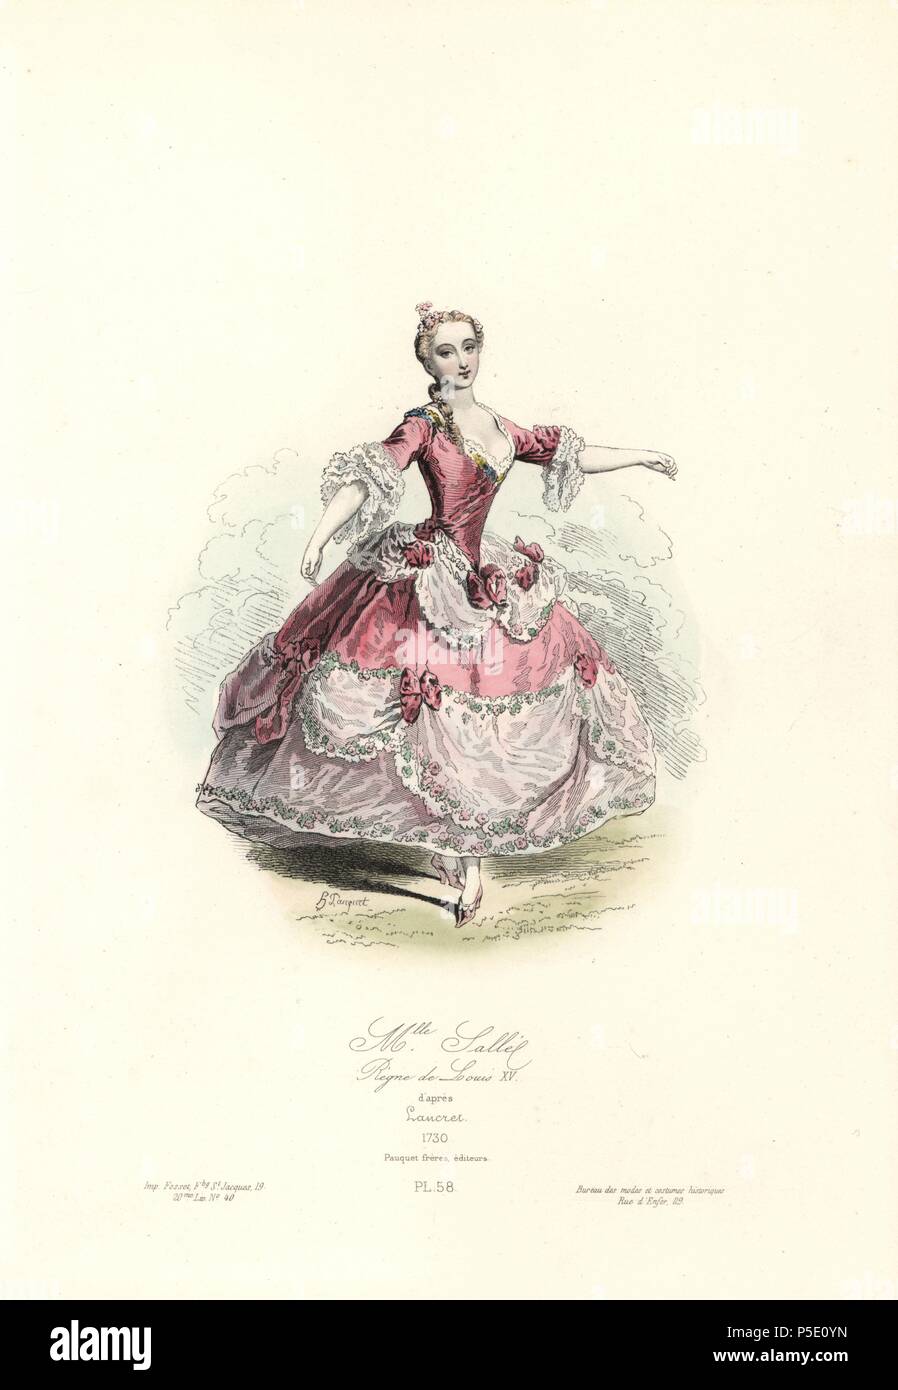 Mlle. Salle, reign of Charles XV, 1730. Marie Salle was a French ballet dancer who debuted in Paris in 1721, and enjoyed a successful career in London and Paris until her retirement in 1740. Handcoloured steel engraving by Hippolyte Pauquet after Nicolas Lancret from the Pauquet Brothers' 'Modes et Costumes Historiques' (Historical Fashions and Costumes), Paris, 1865. Hippolyte (b. 1797) and Polydor Pauquet (b. 1799) ran a successful publishing house in Paris in the 19th century, specializing in illustrated books on costume, birds, butterflies, anatomy and natural history. Stock Photo